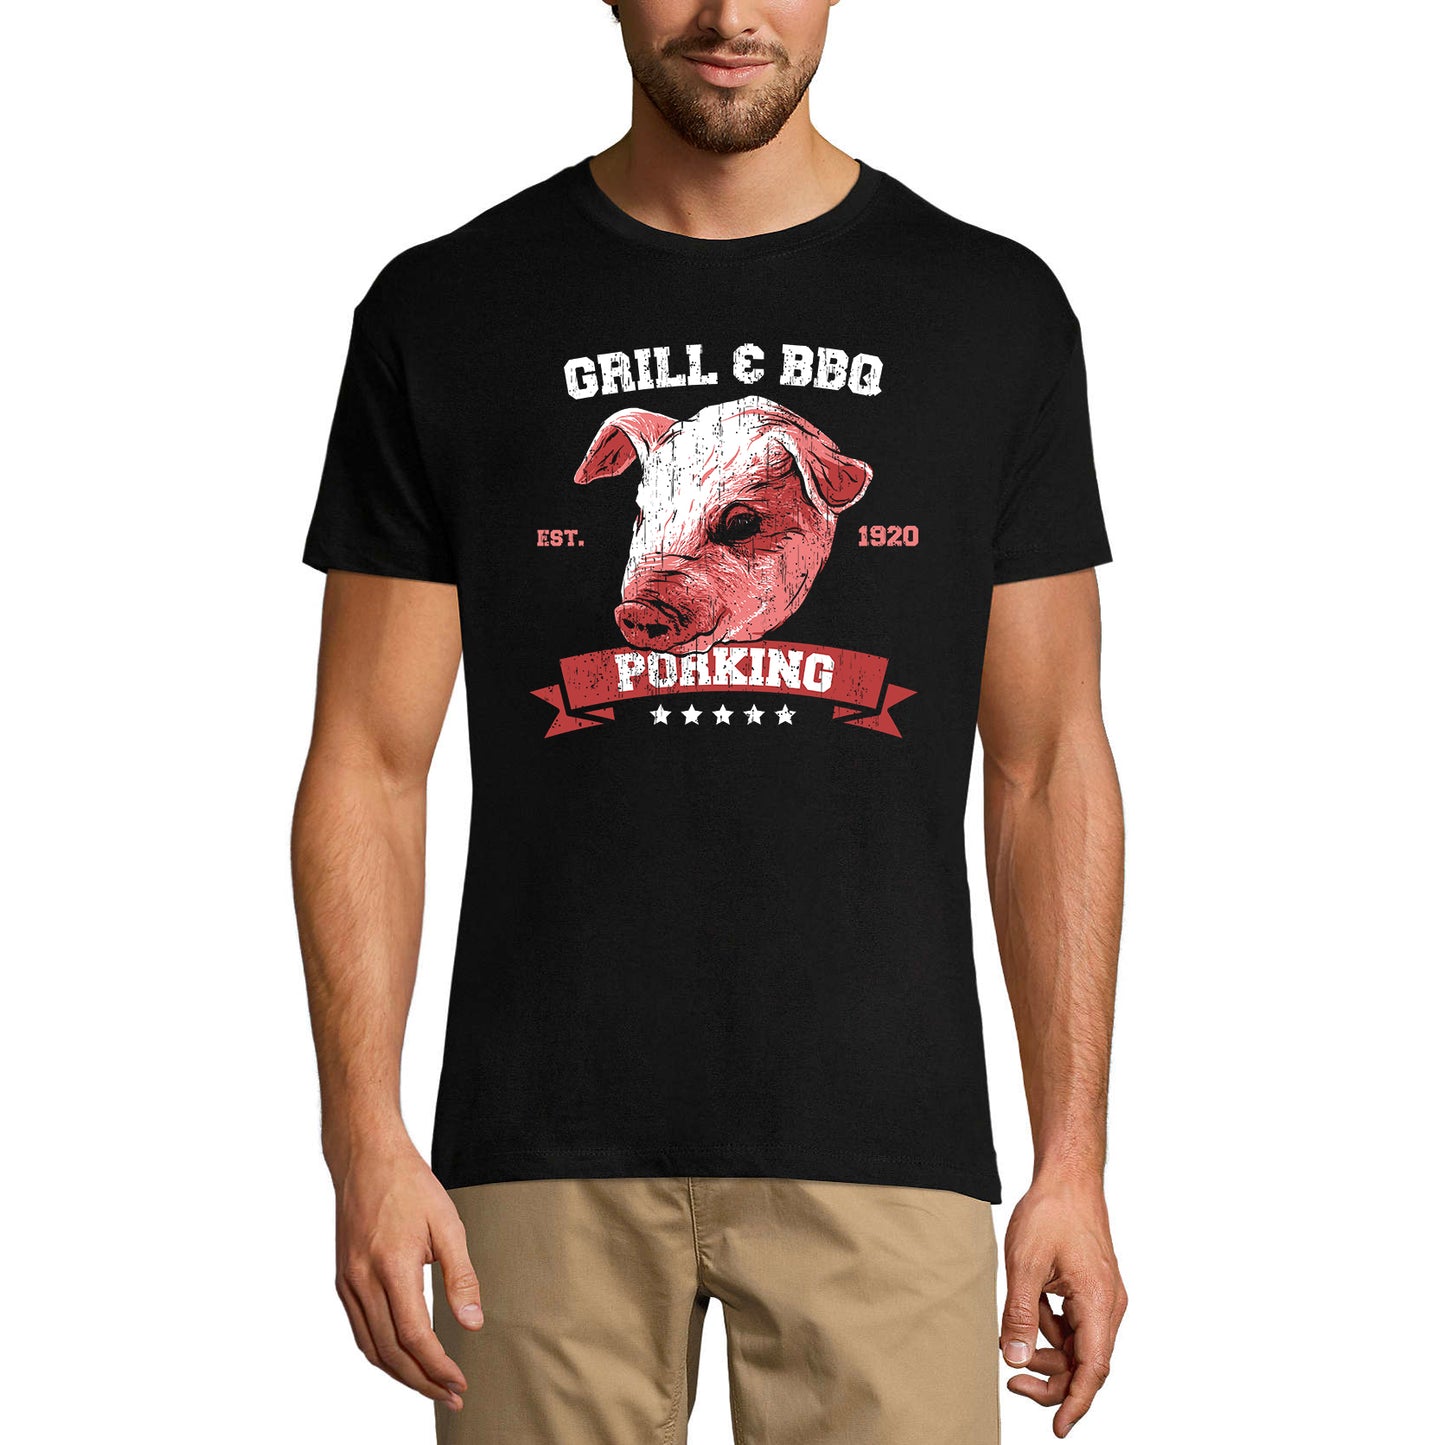 ULTRABASIC Men's Graphic T-Shirt Grill and BBQ Porking - Barbecue Shirt for Men